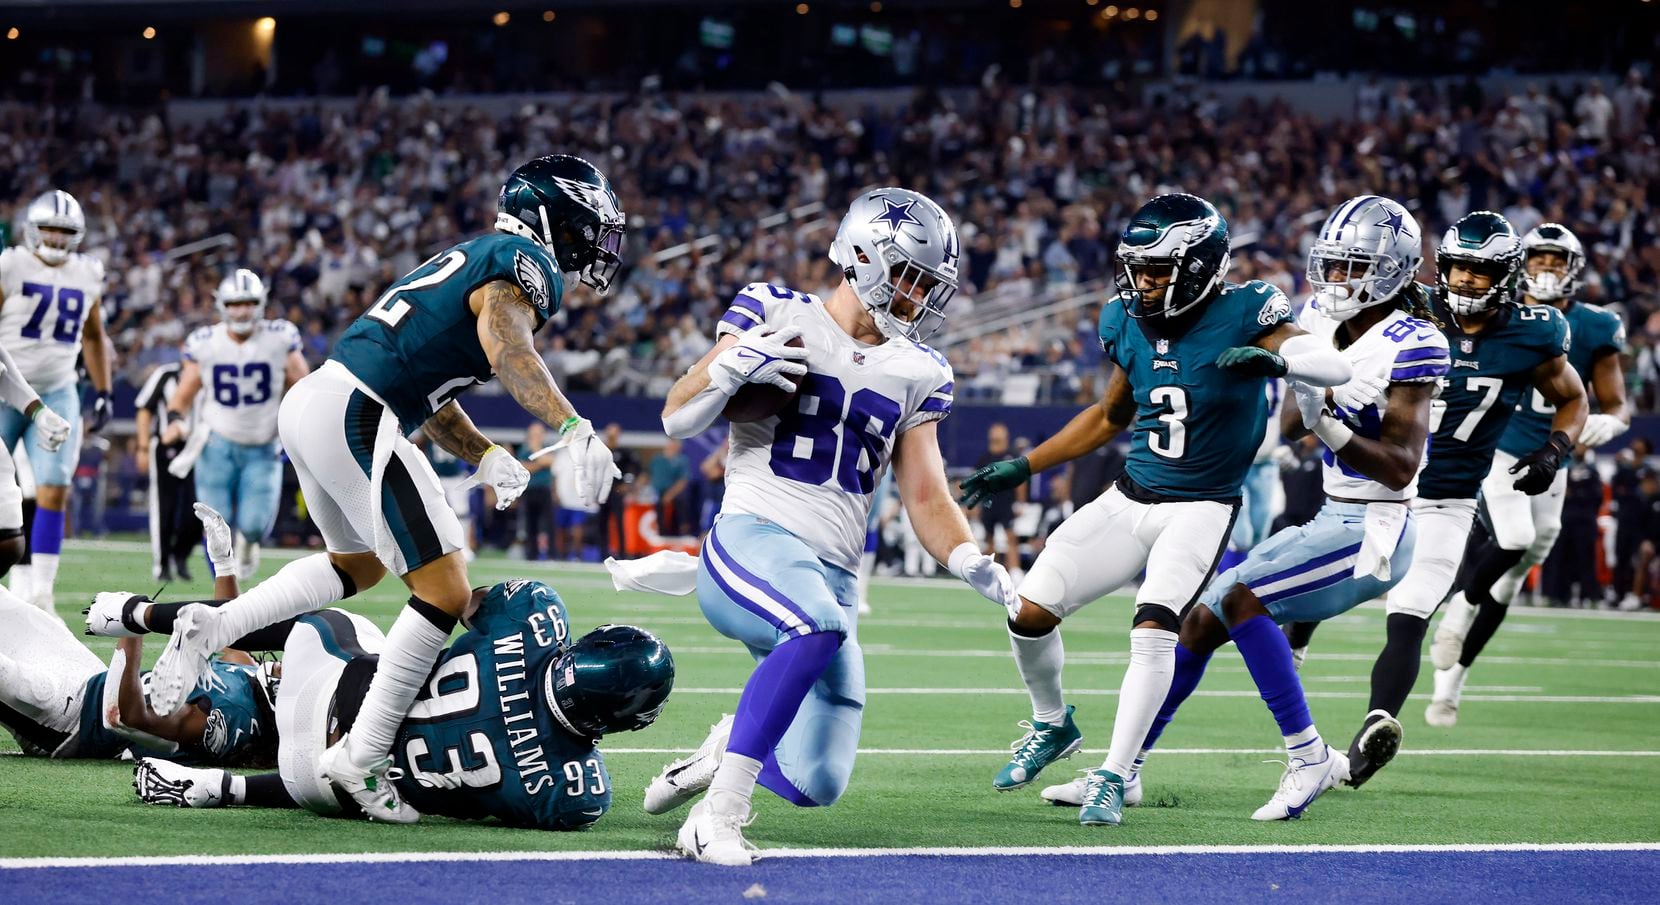 Dallas Cowboys tight end Dalton Schultz (86) slides into the end zone after running in a fourth quarter completion against the Philadelphia Eagles defense at AT&T Stadium in Arlington, Monday, September 27, 2021. (Tom Fox/The Dallas Morning News)